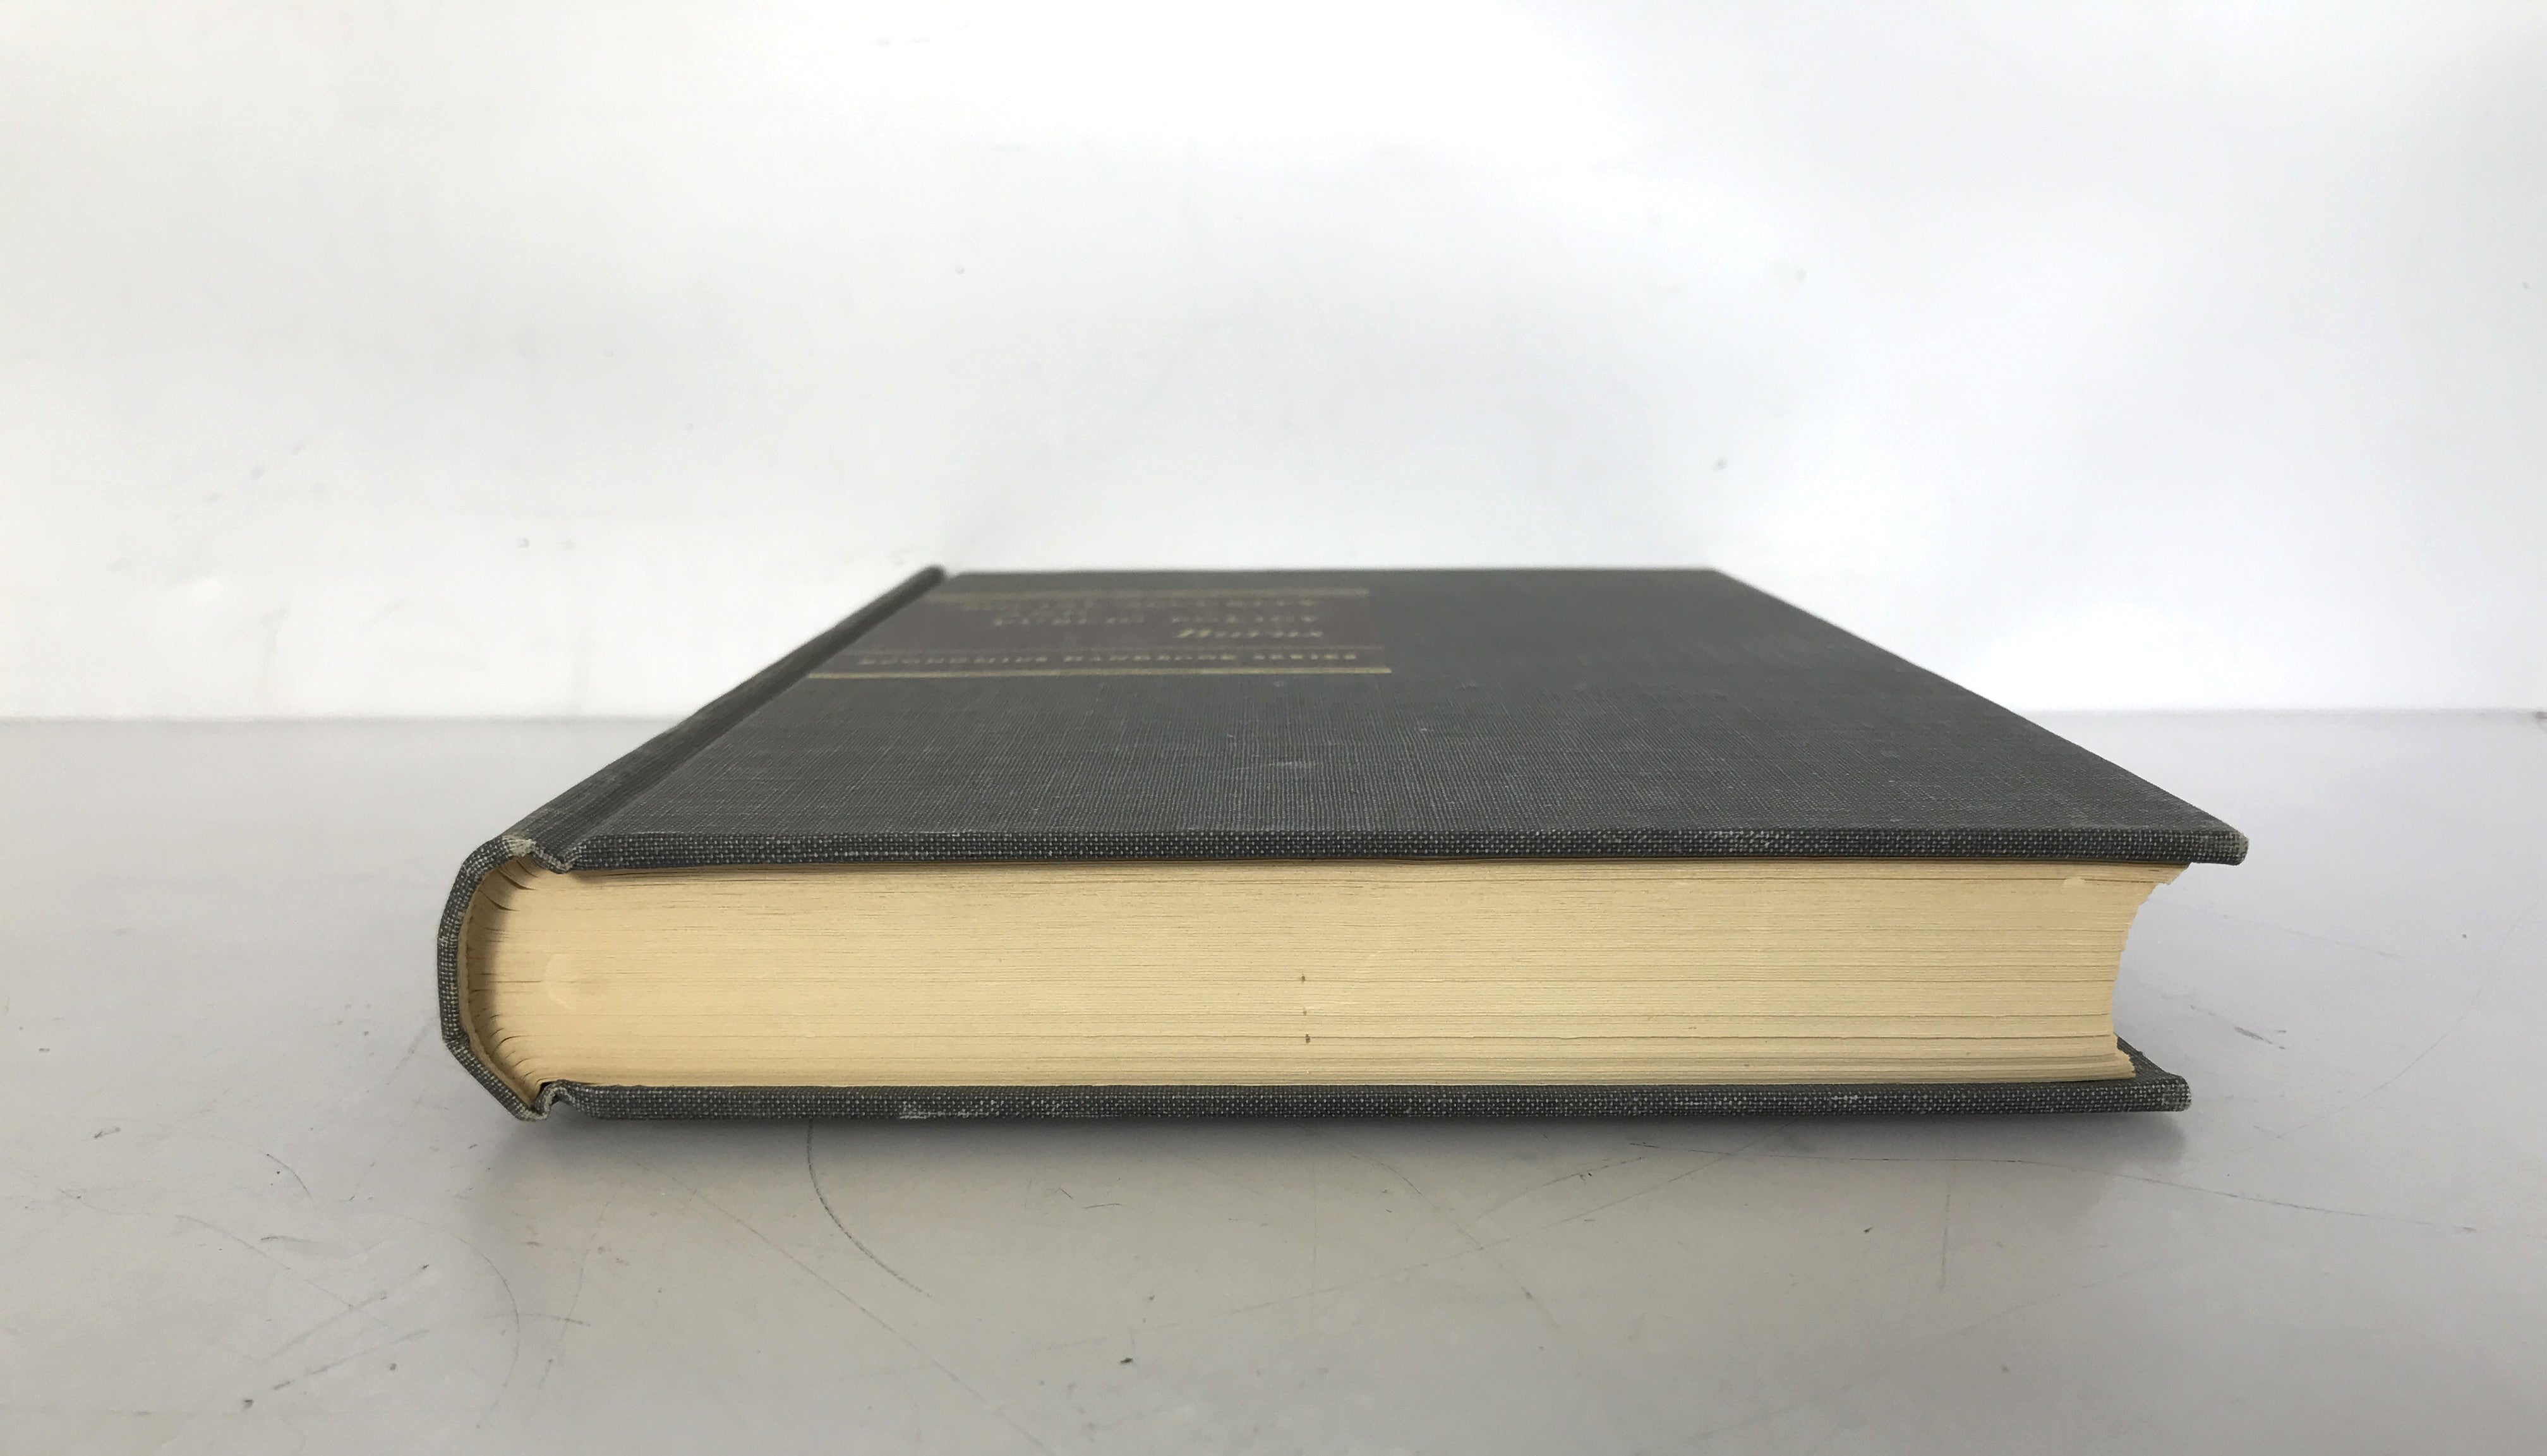 Social Security and Public Policy by Eveline Burns 1956 HC